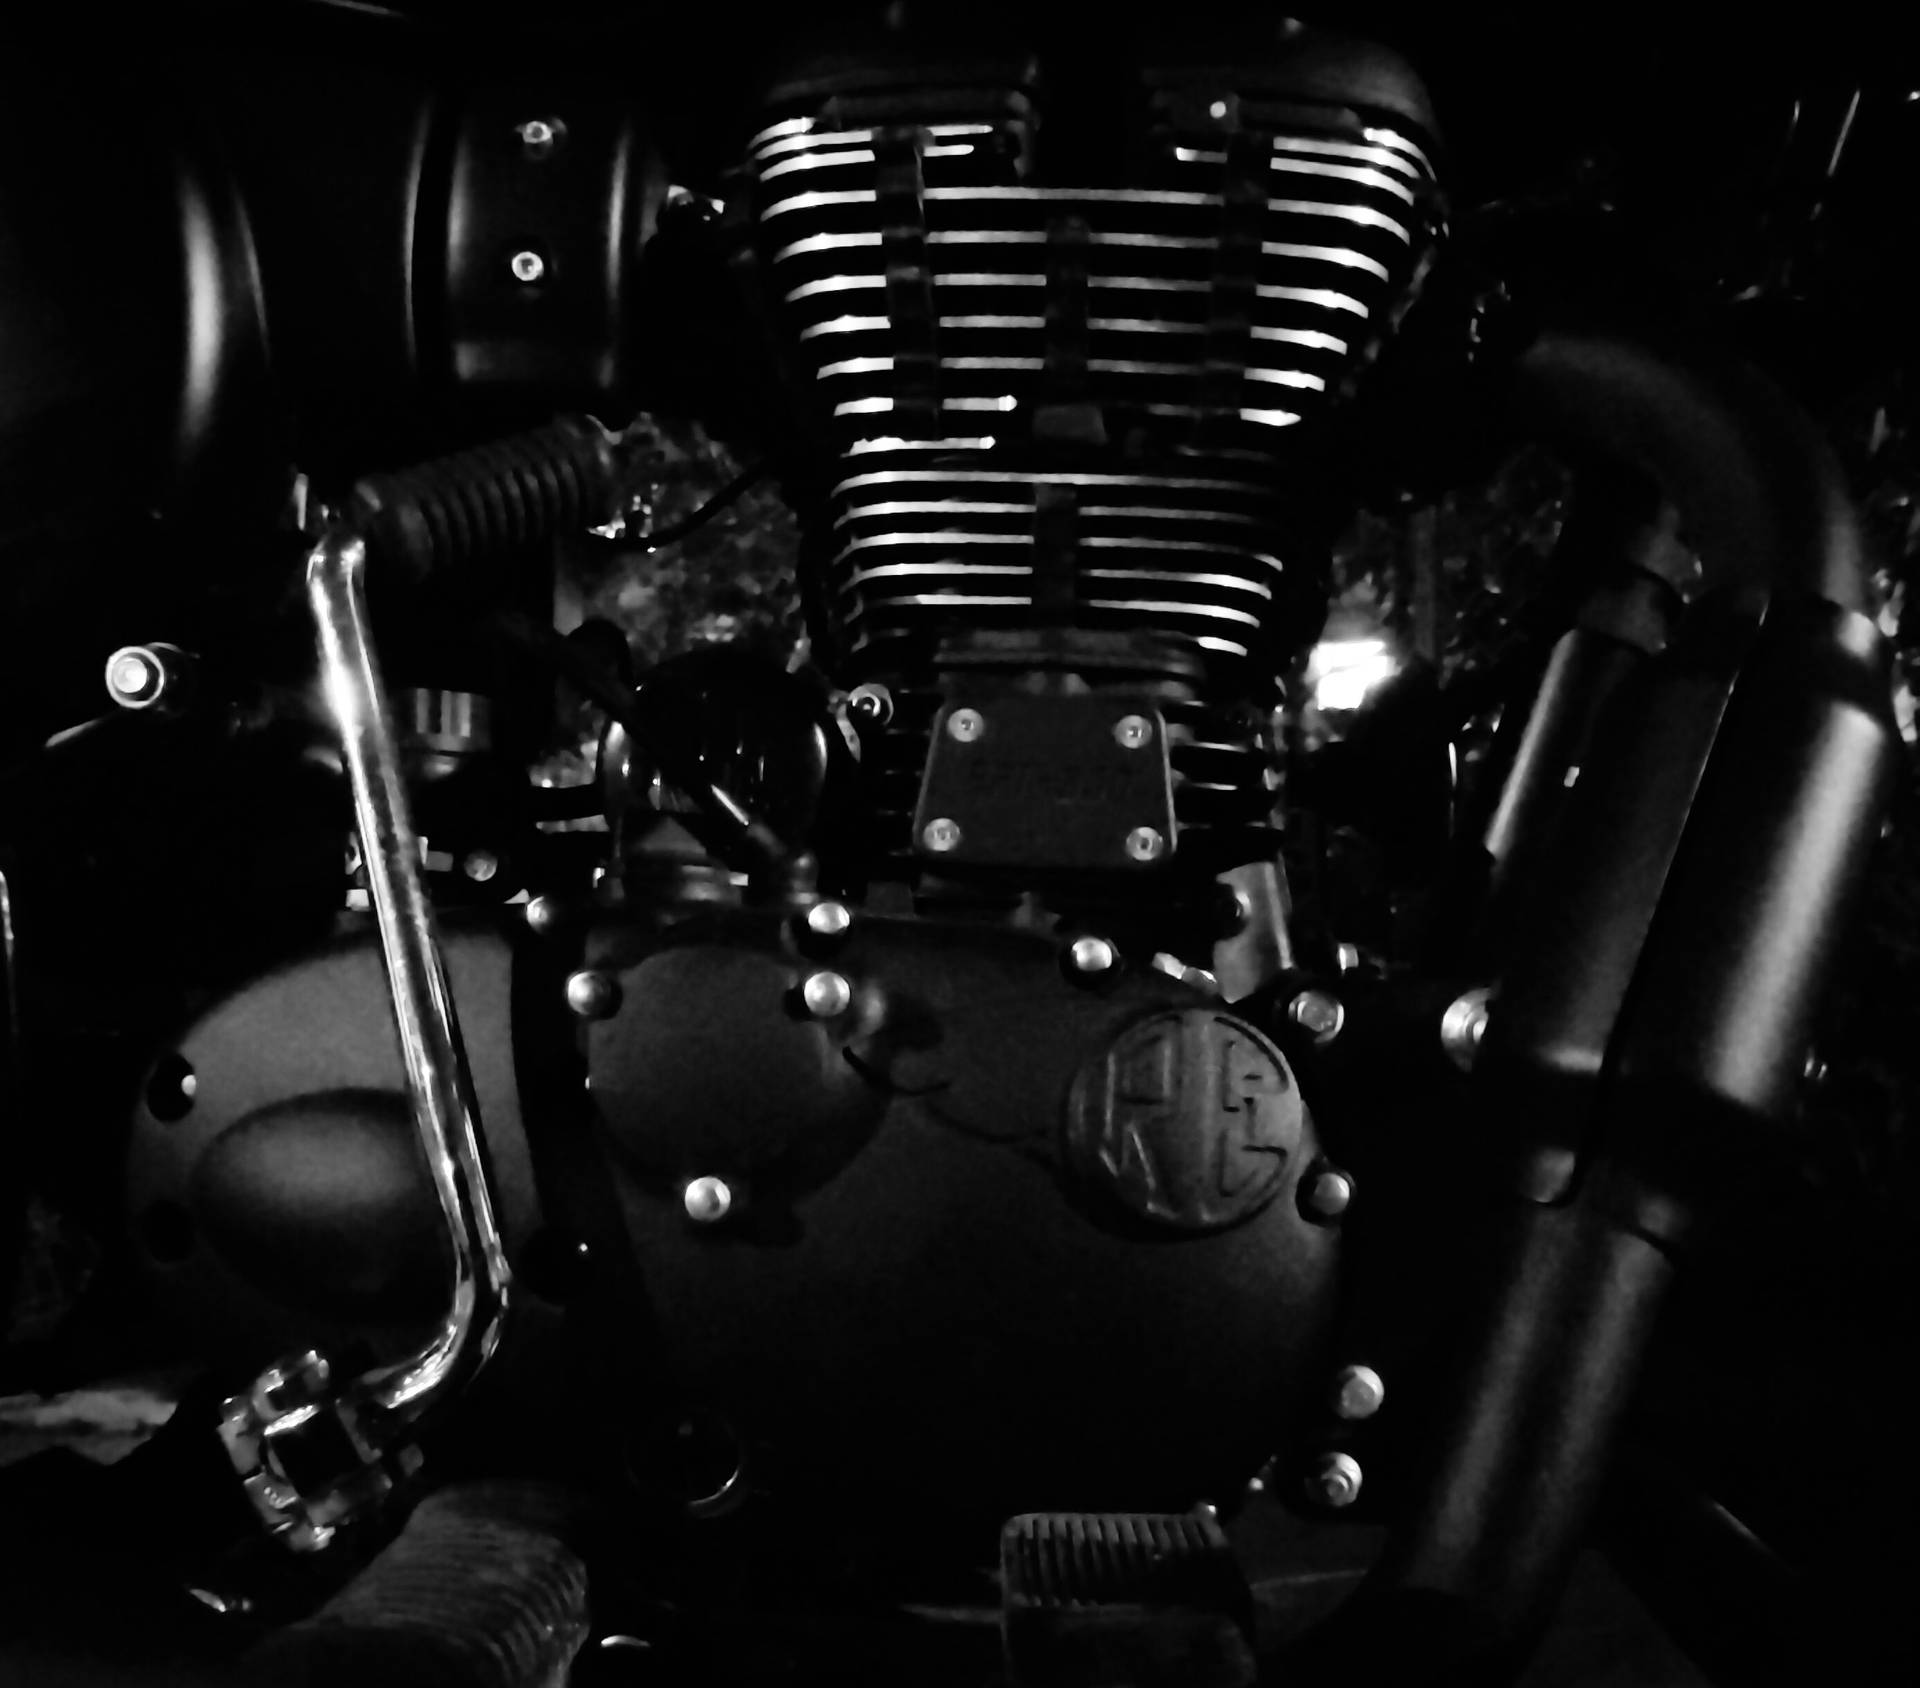 A Single Engine Motorcycle Oozing Strength And Power. Background